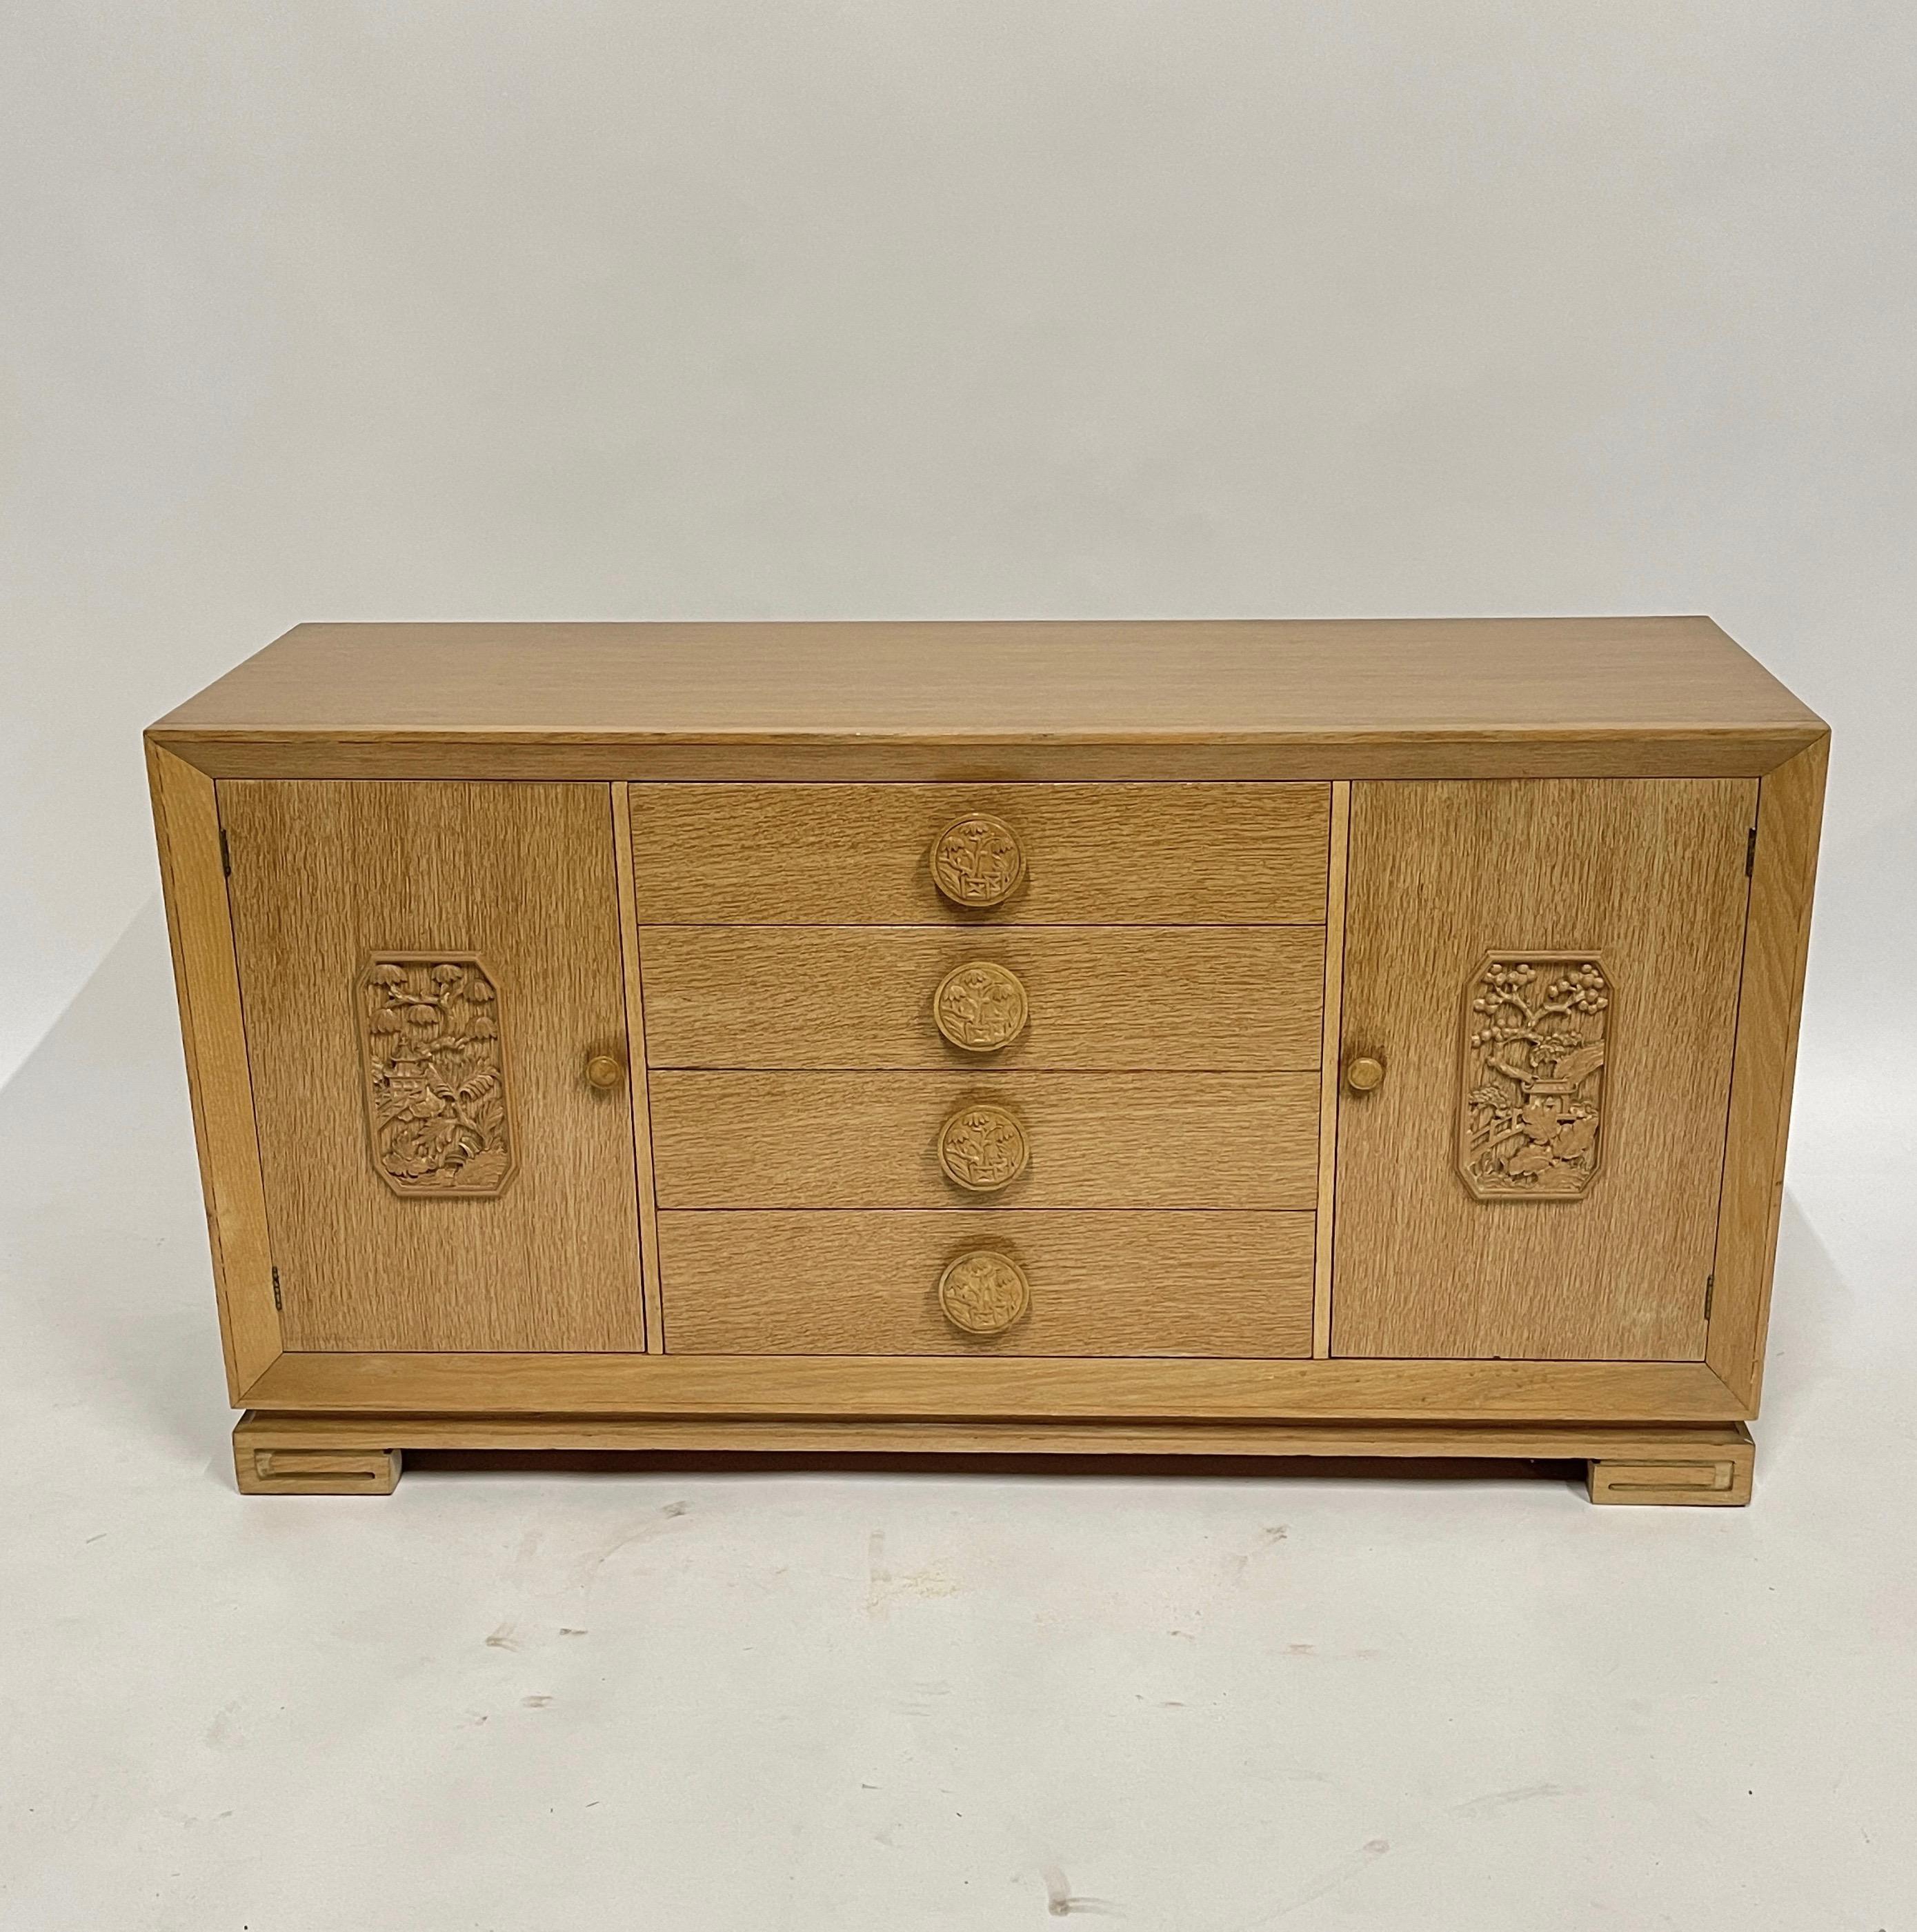 James Mont attributed coursed oak four drawer and two-door cabinet with shelves and interior drawers. Lovely carved doors and oversized drawer pulls. Asian inspired chinoiserie bureau from the 1940s in very nice original condition.